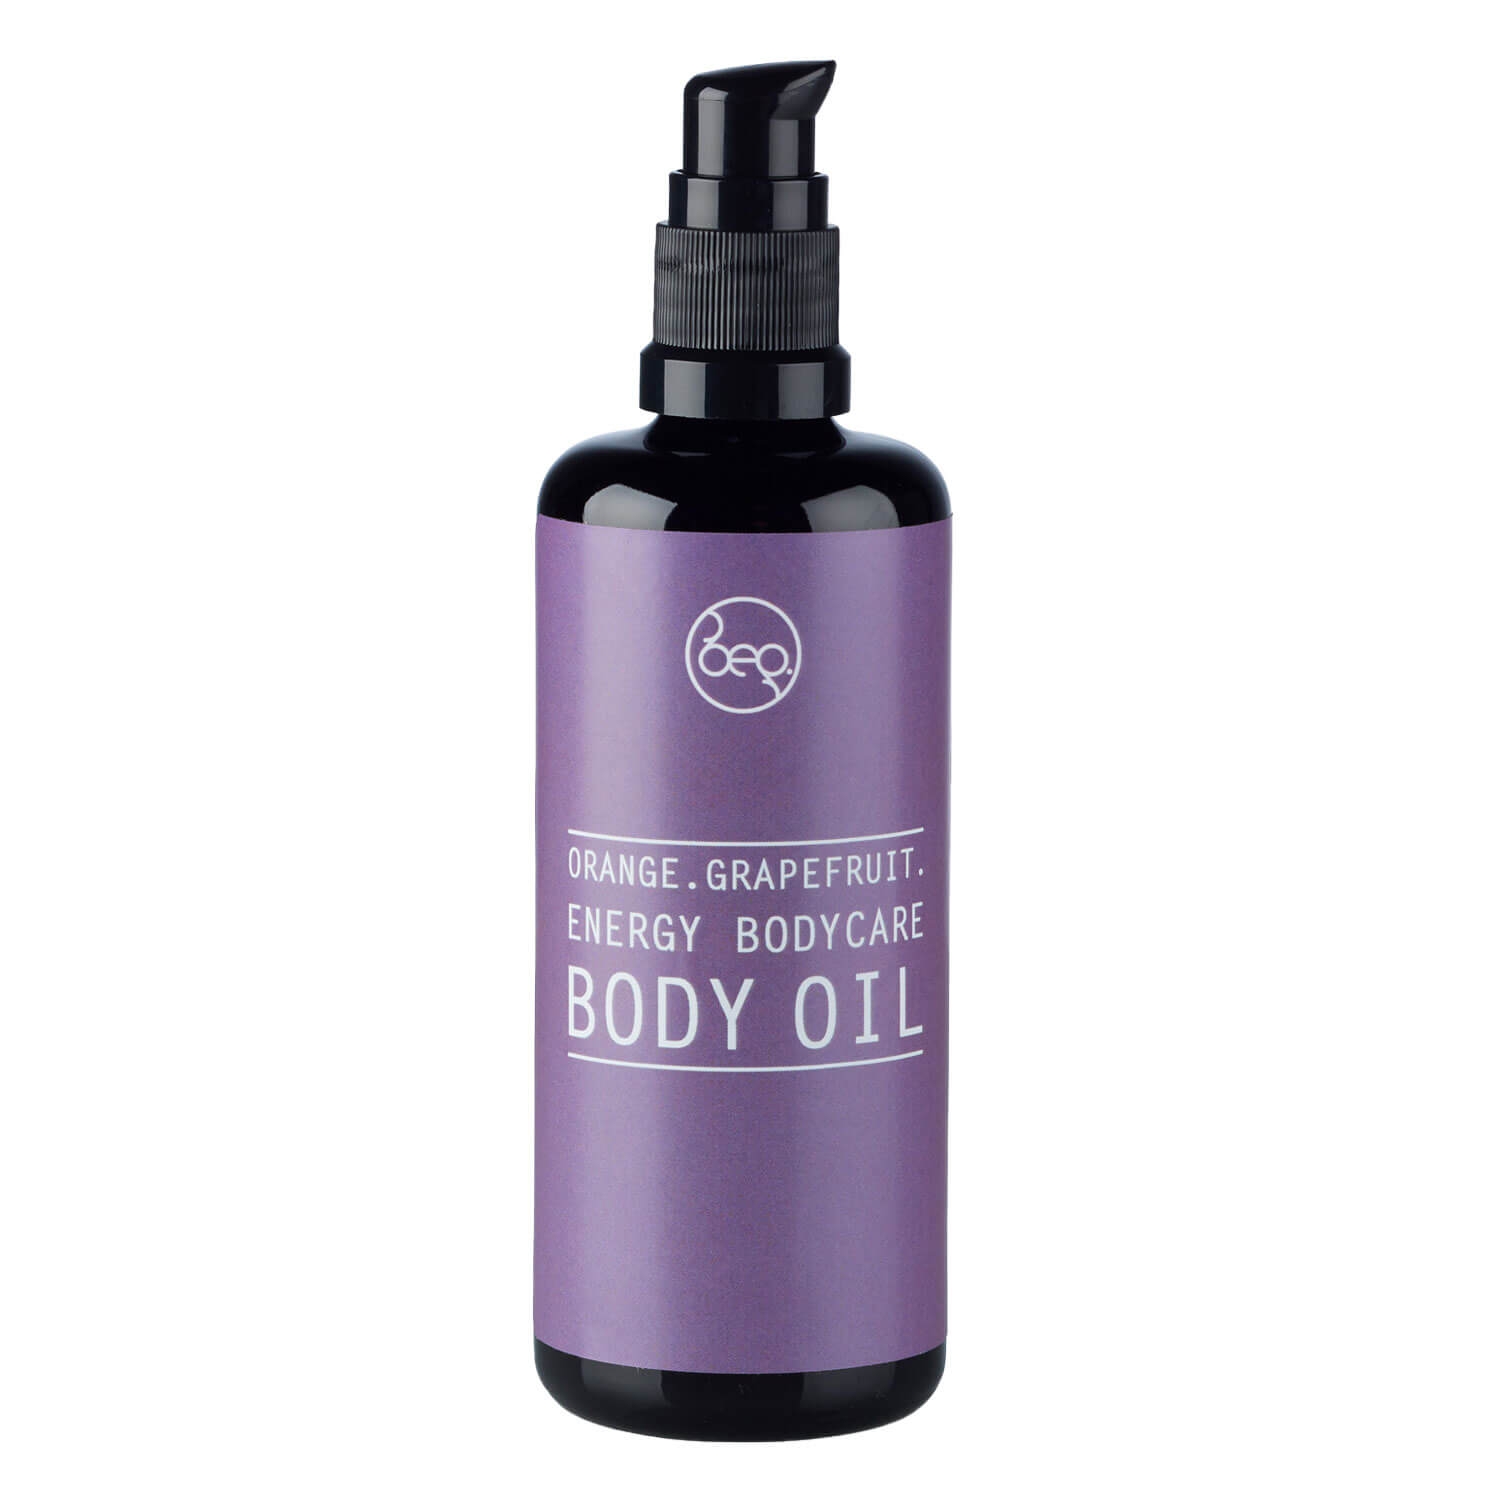 Product image from bepure - Body Oil ENERGY BODYCARE